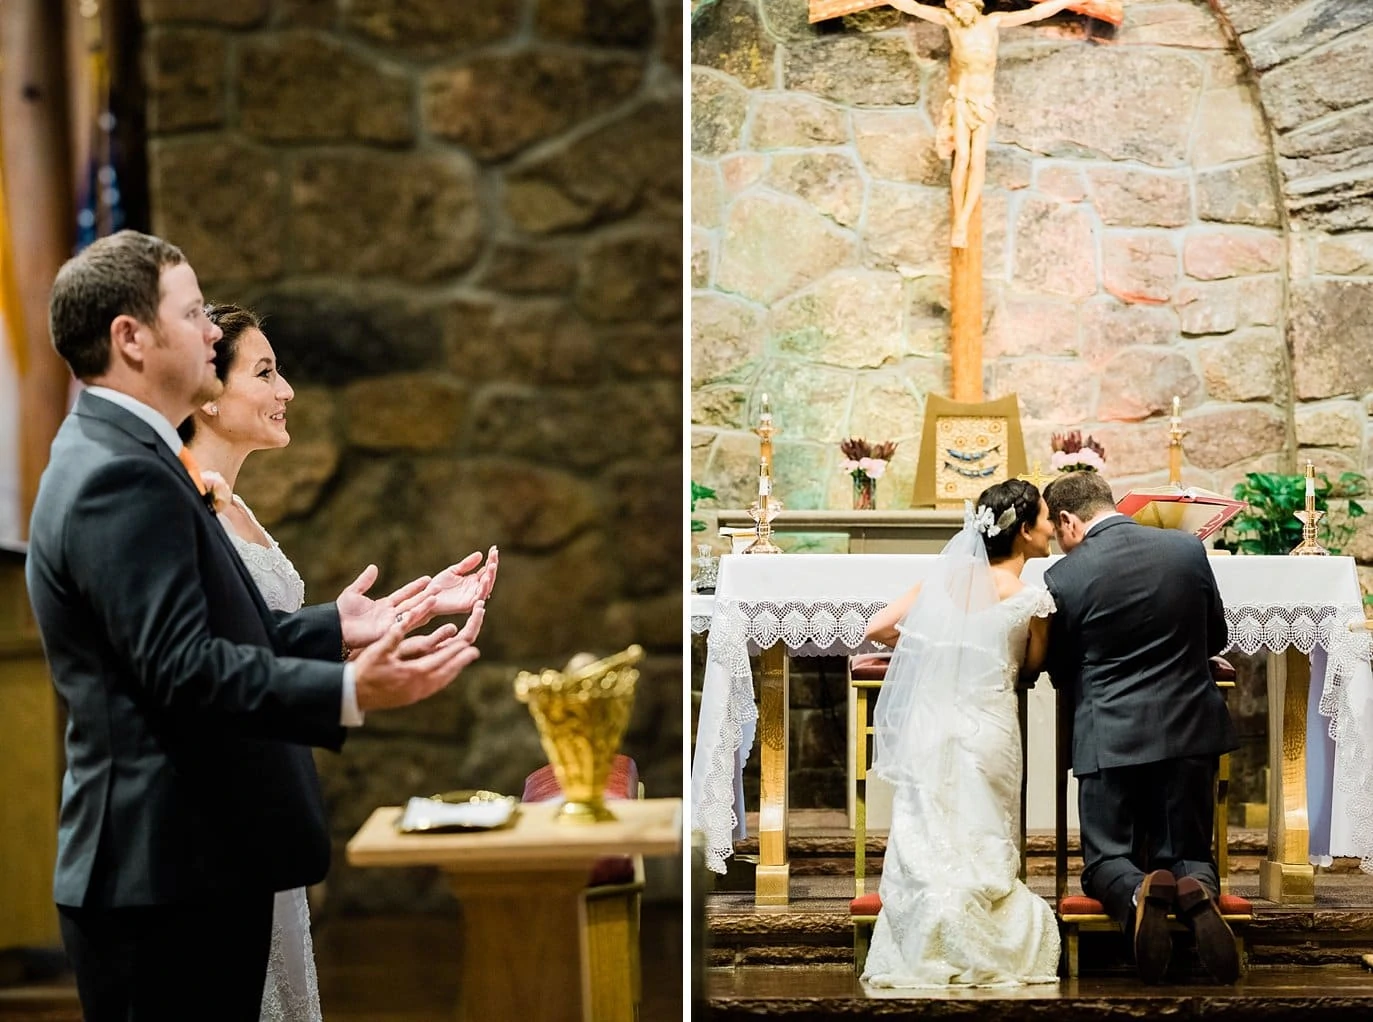 prayer during wedding mass of Our Lady of the Mountain Catholic Church wedding by Mountain wedding photographer Jennie Crate